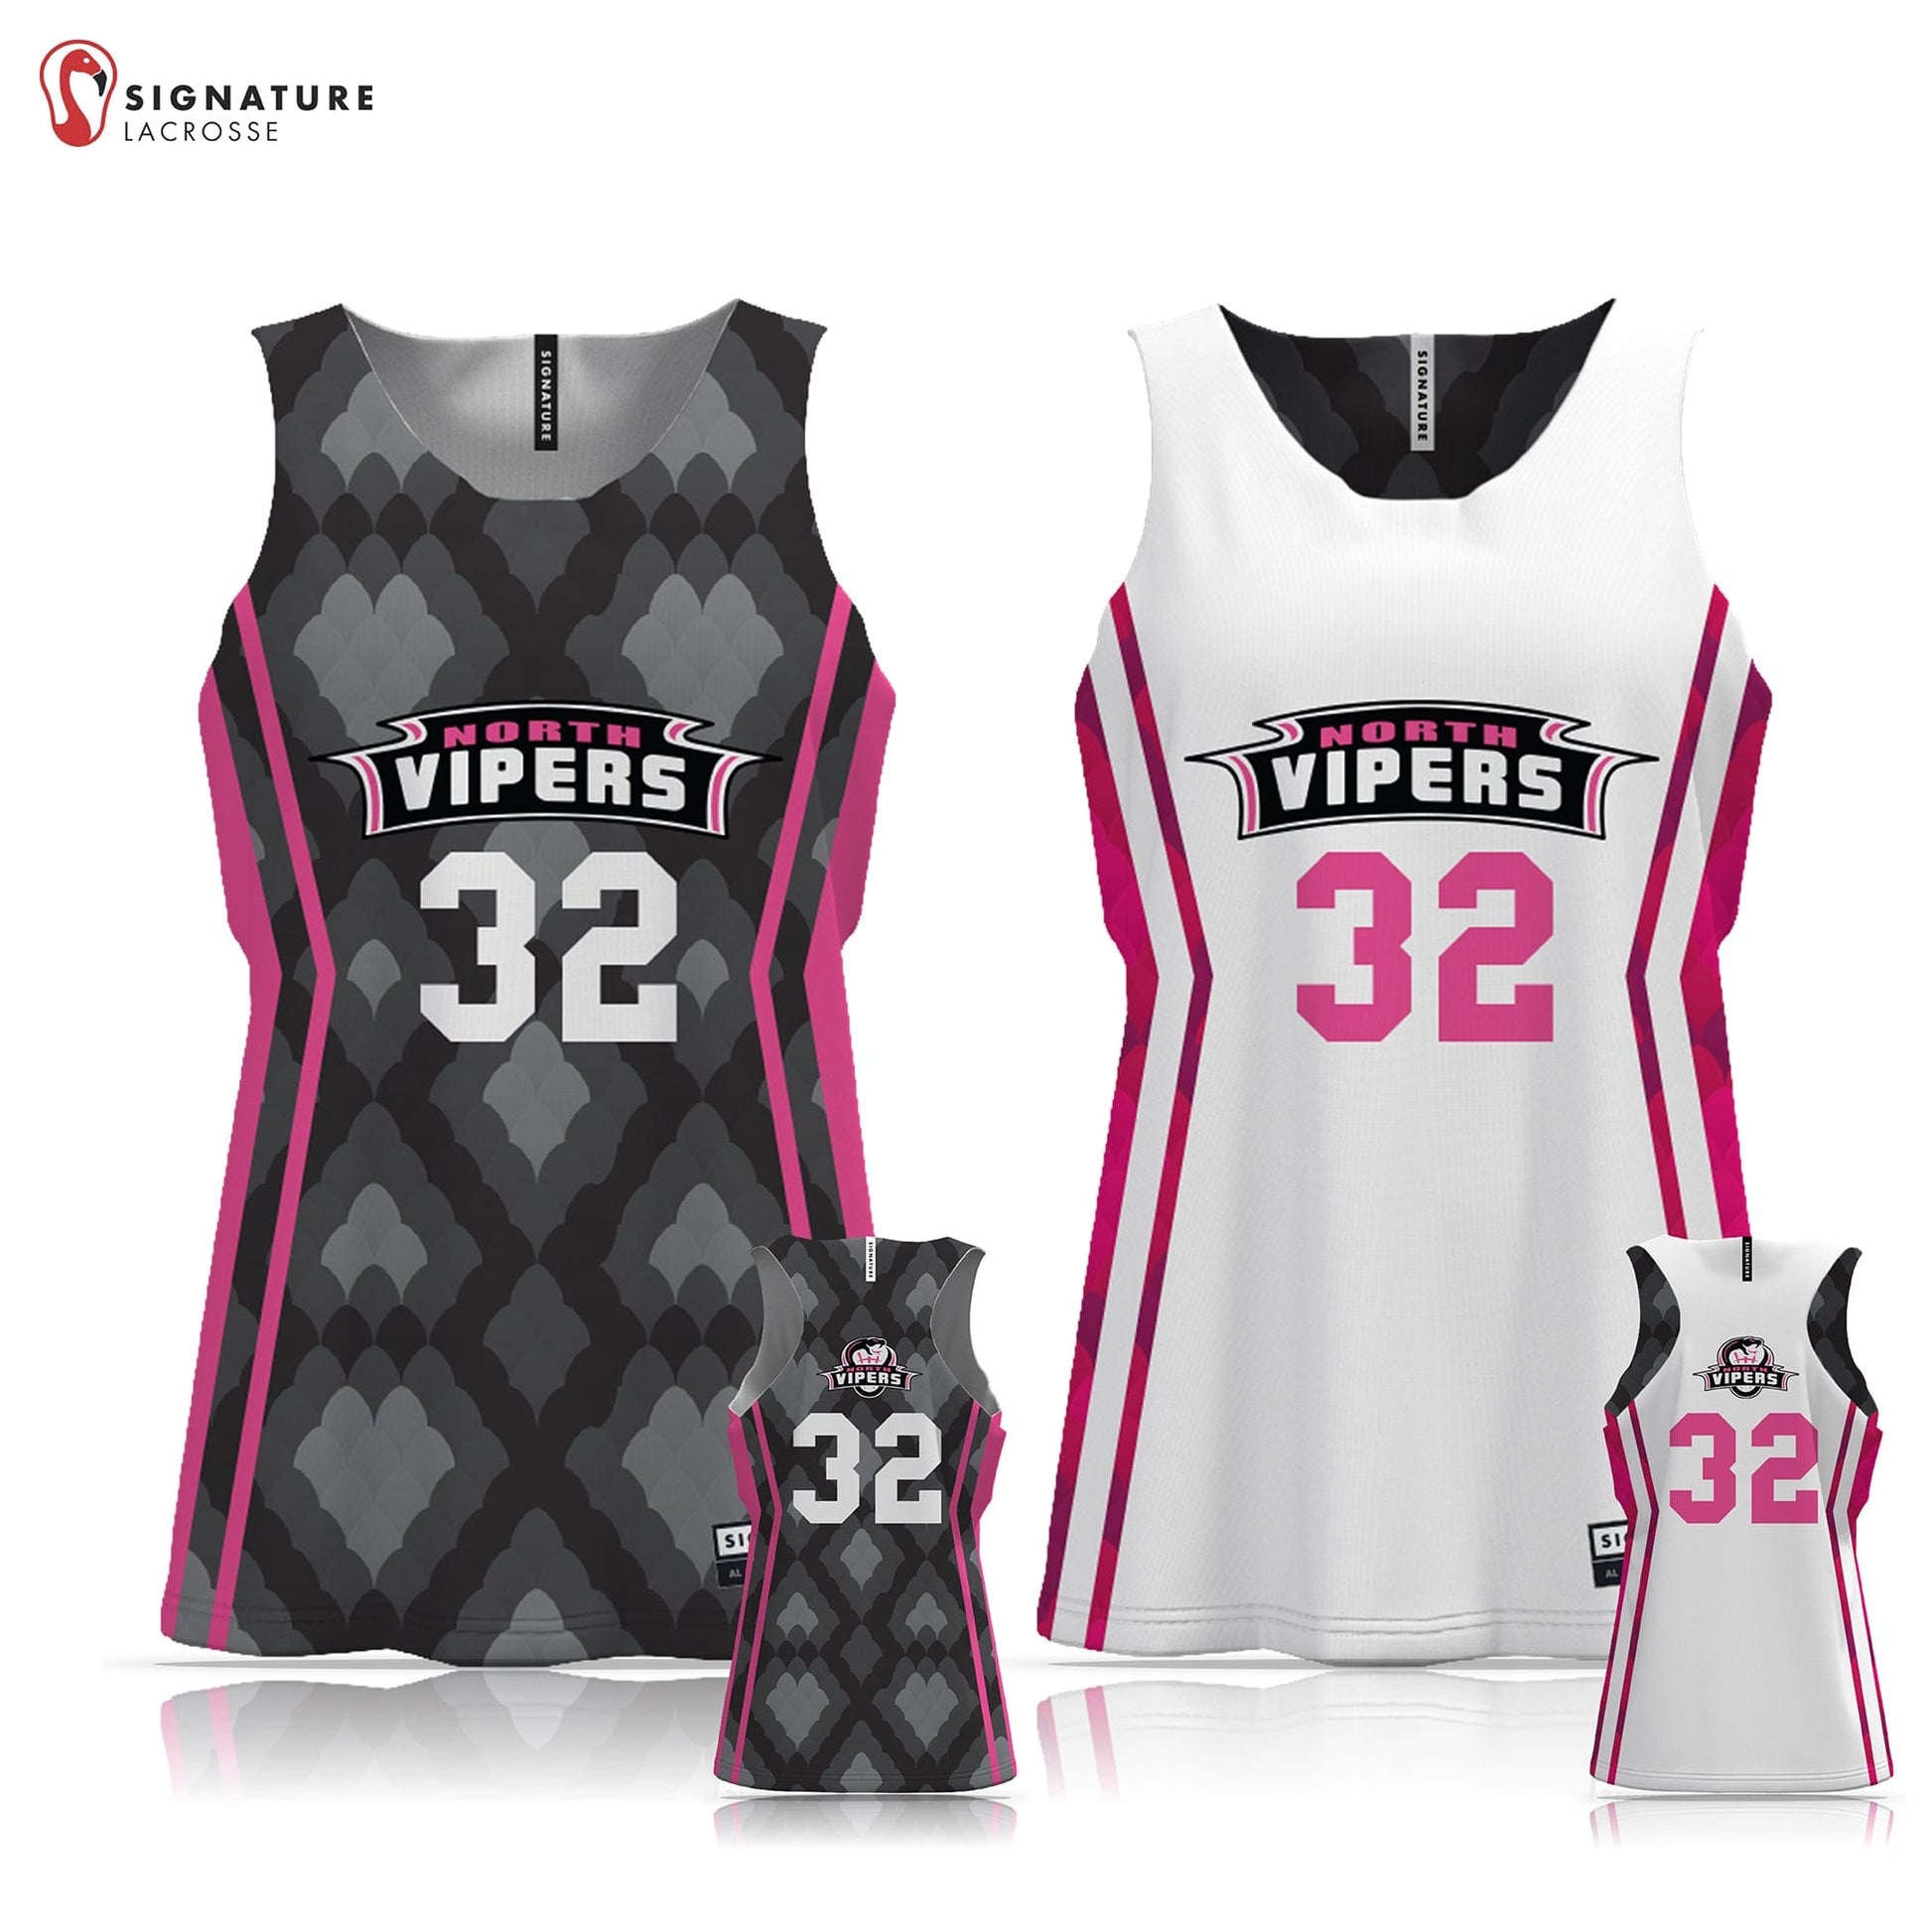 North Vipers Women's 3 Piece Pro Game Package with Skirt Signature Lacrosse